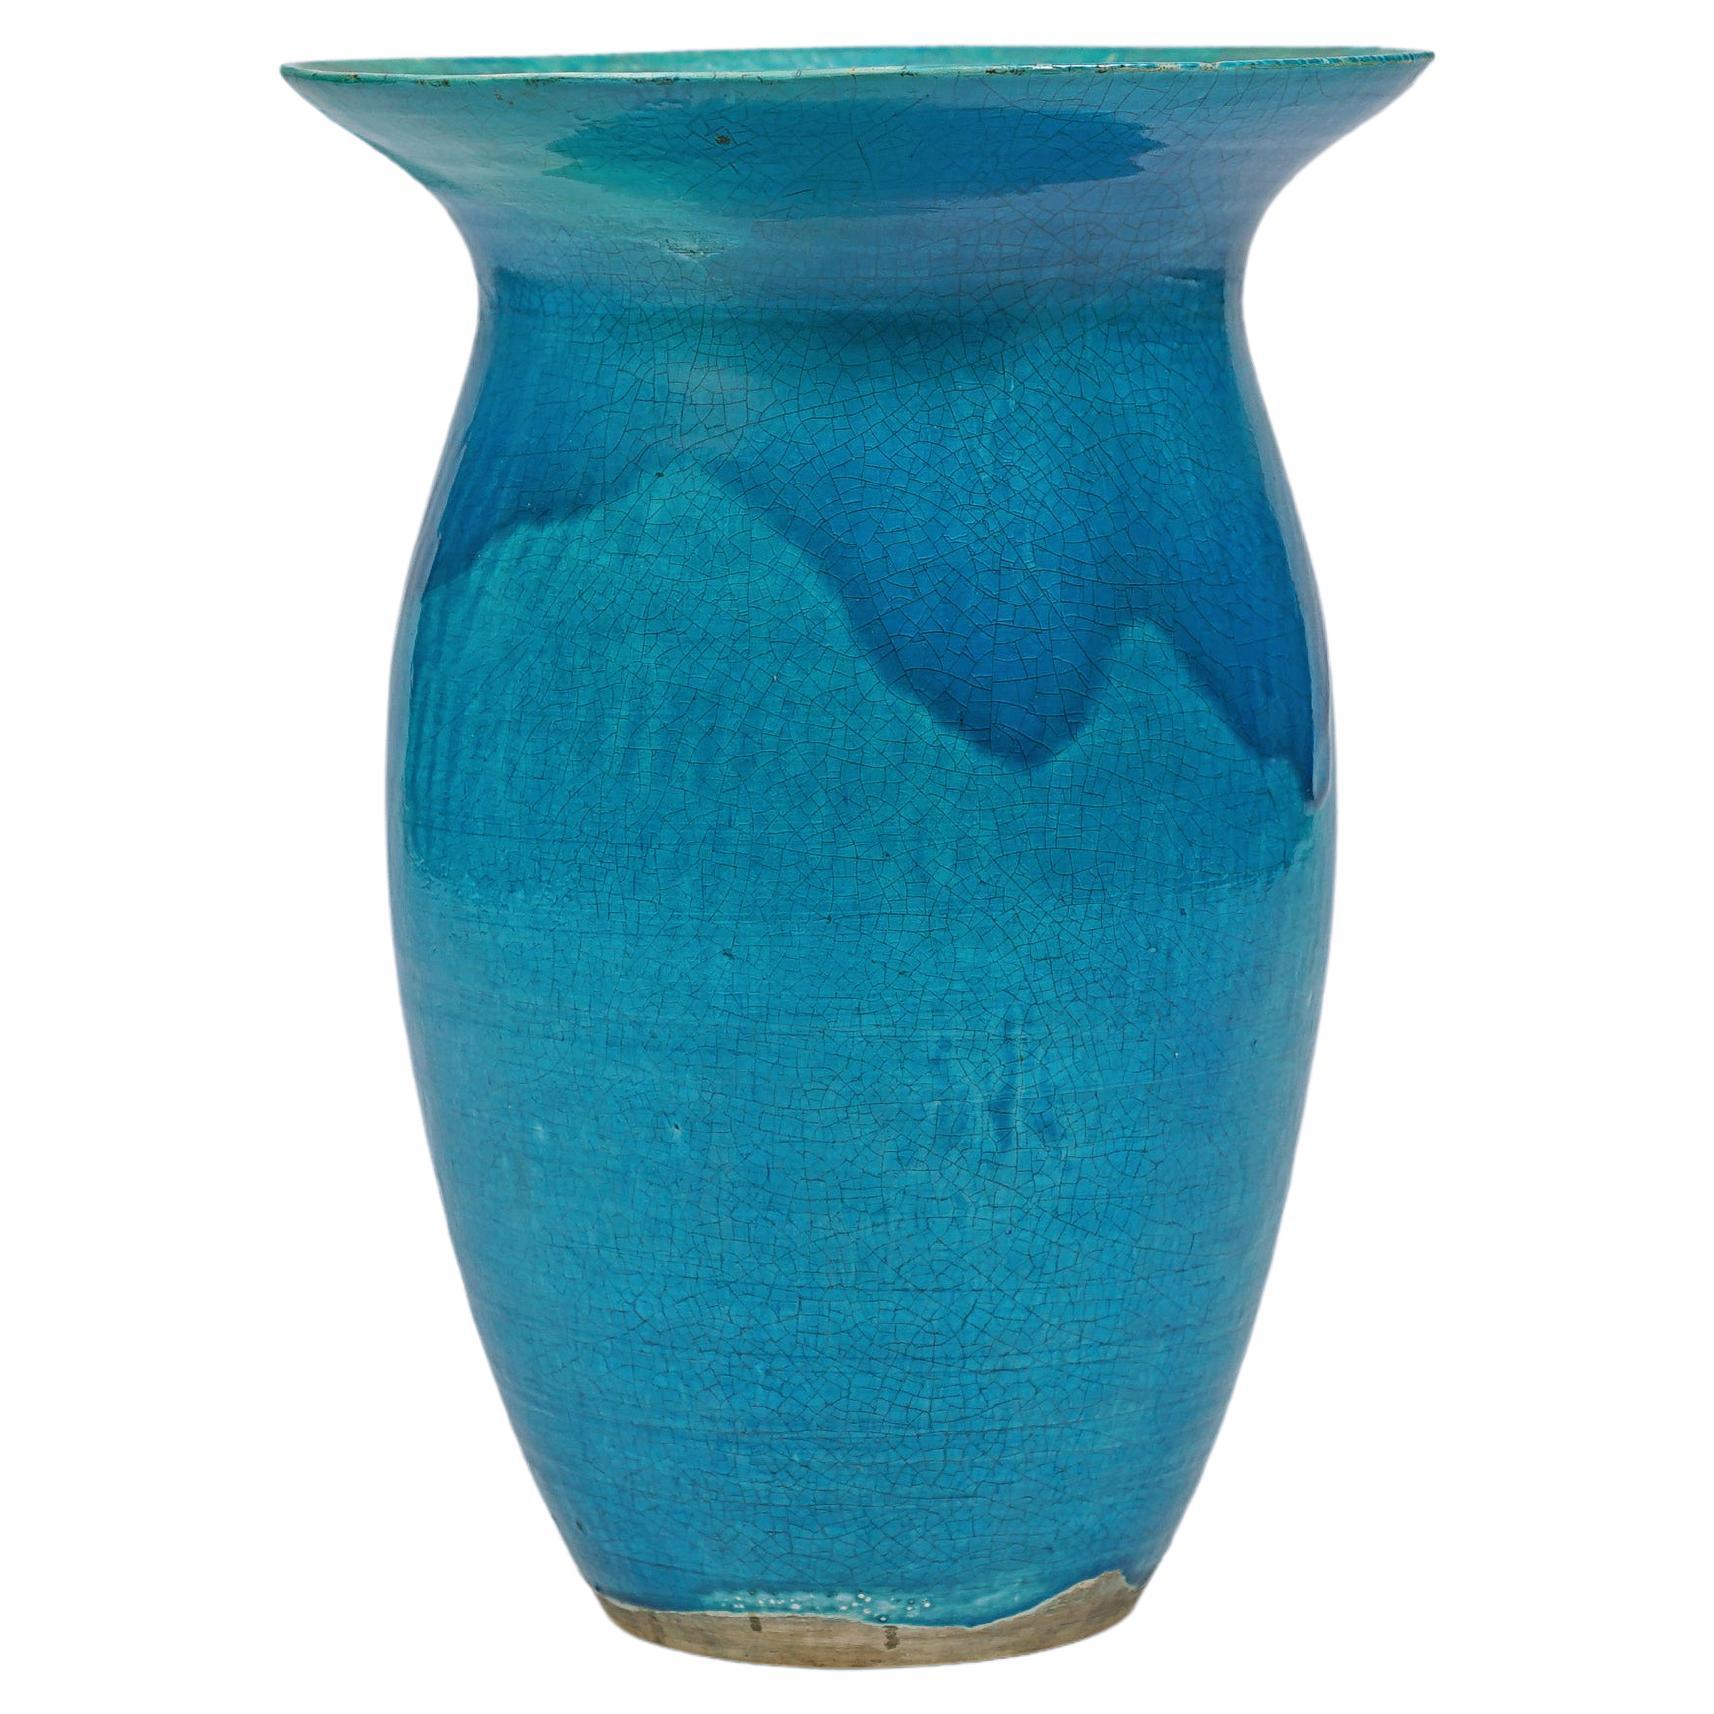 Tall Ceramic Vase "Blue Turquoise" by Jean Besnard For Sale